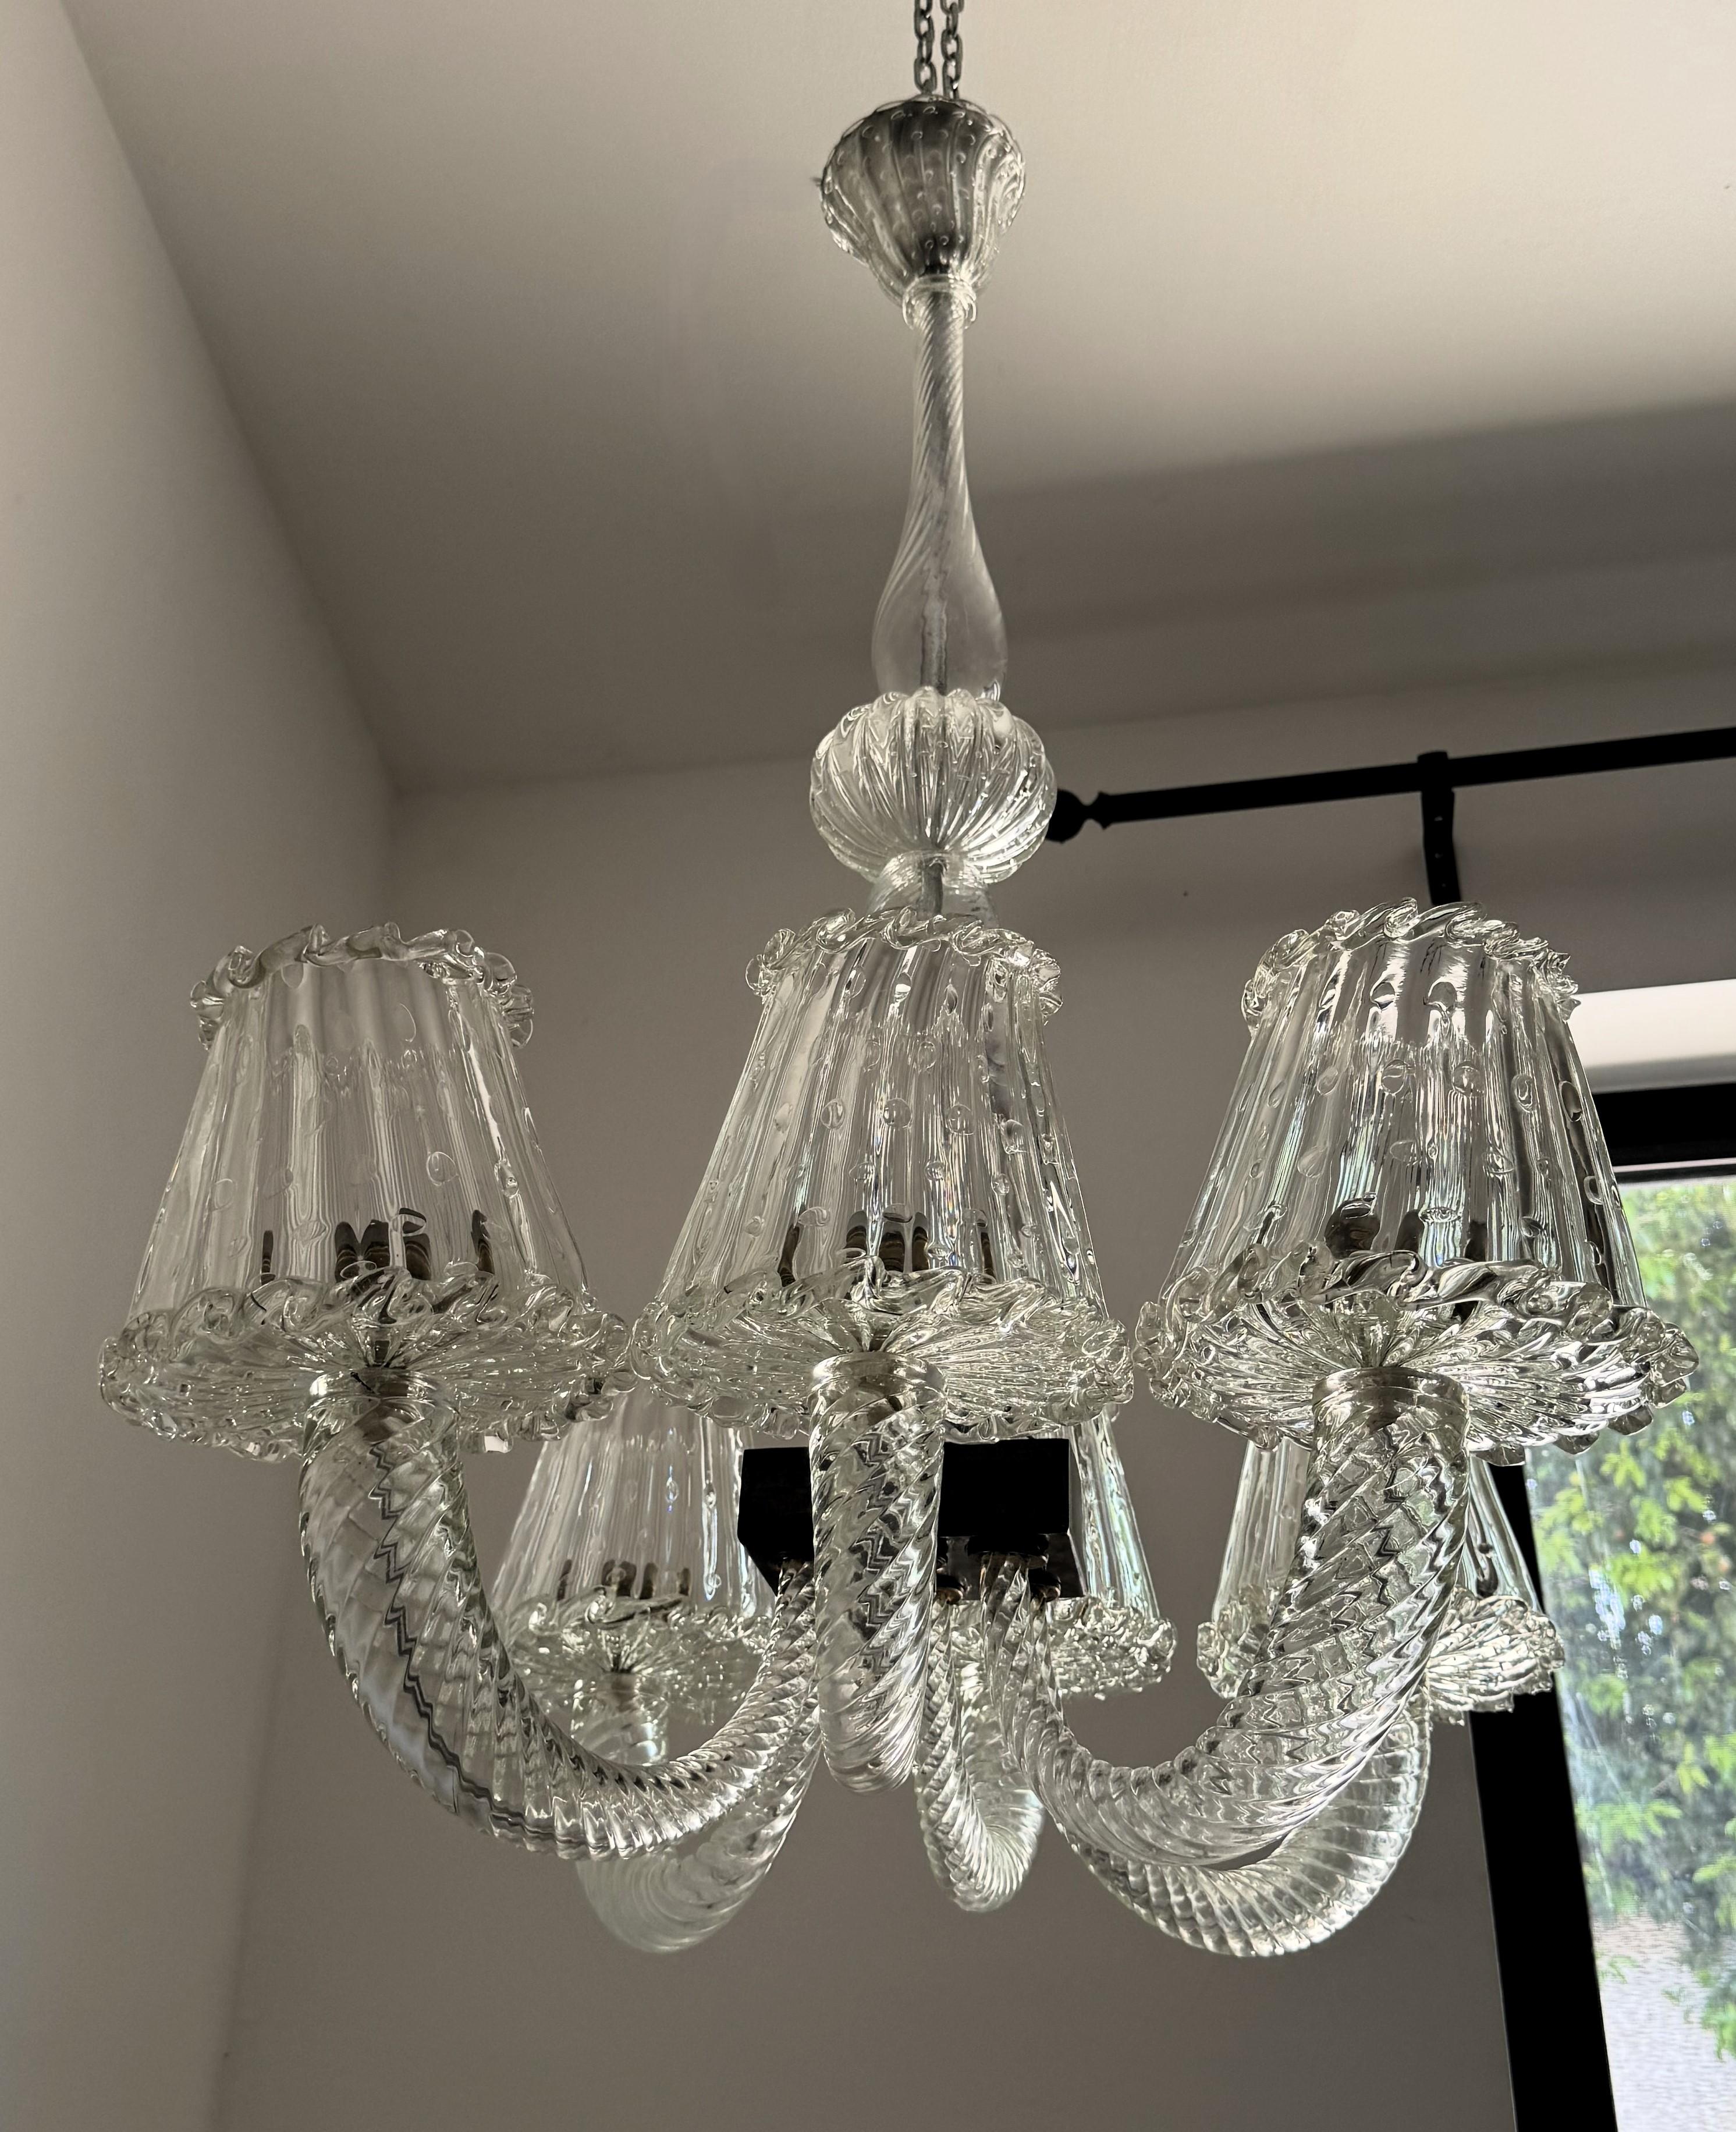 Art Deco Six Light Chandelier Attr. Barovier & Toso, Murano, Italy ca. 1930 For Sale 5